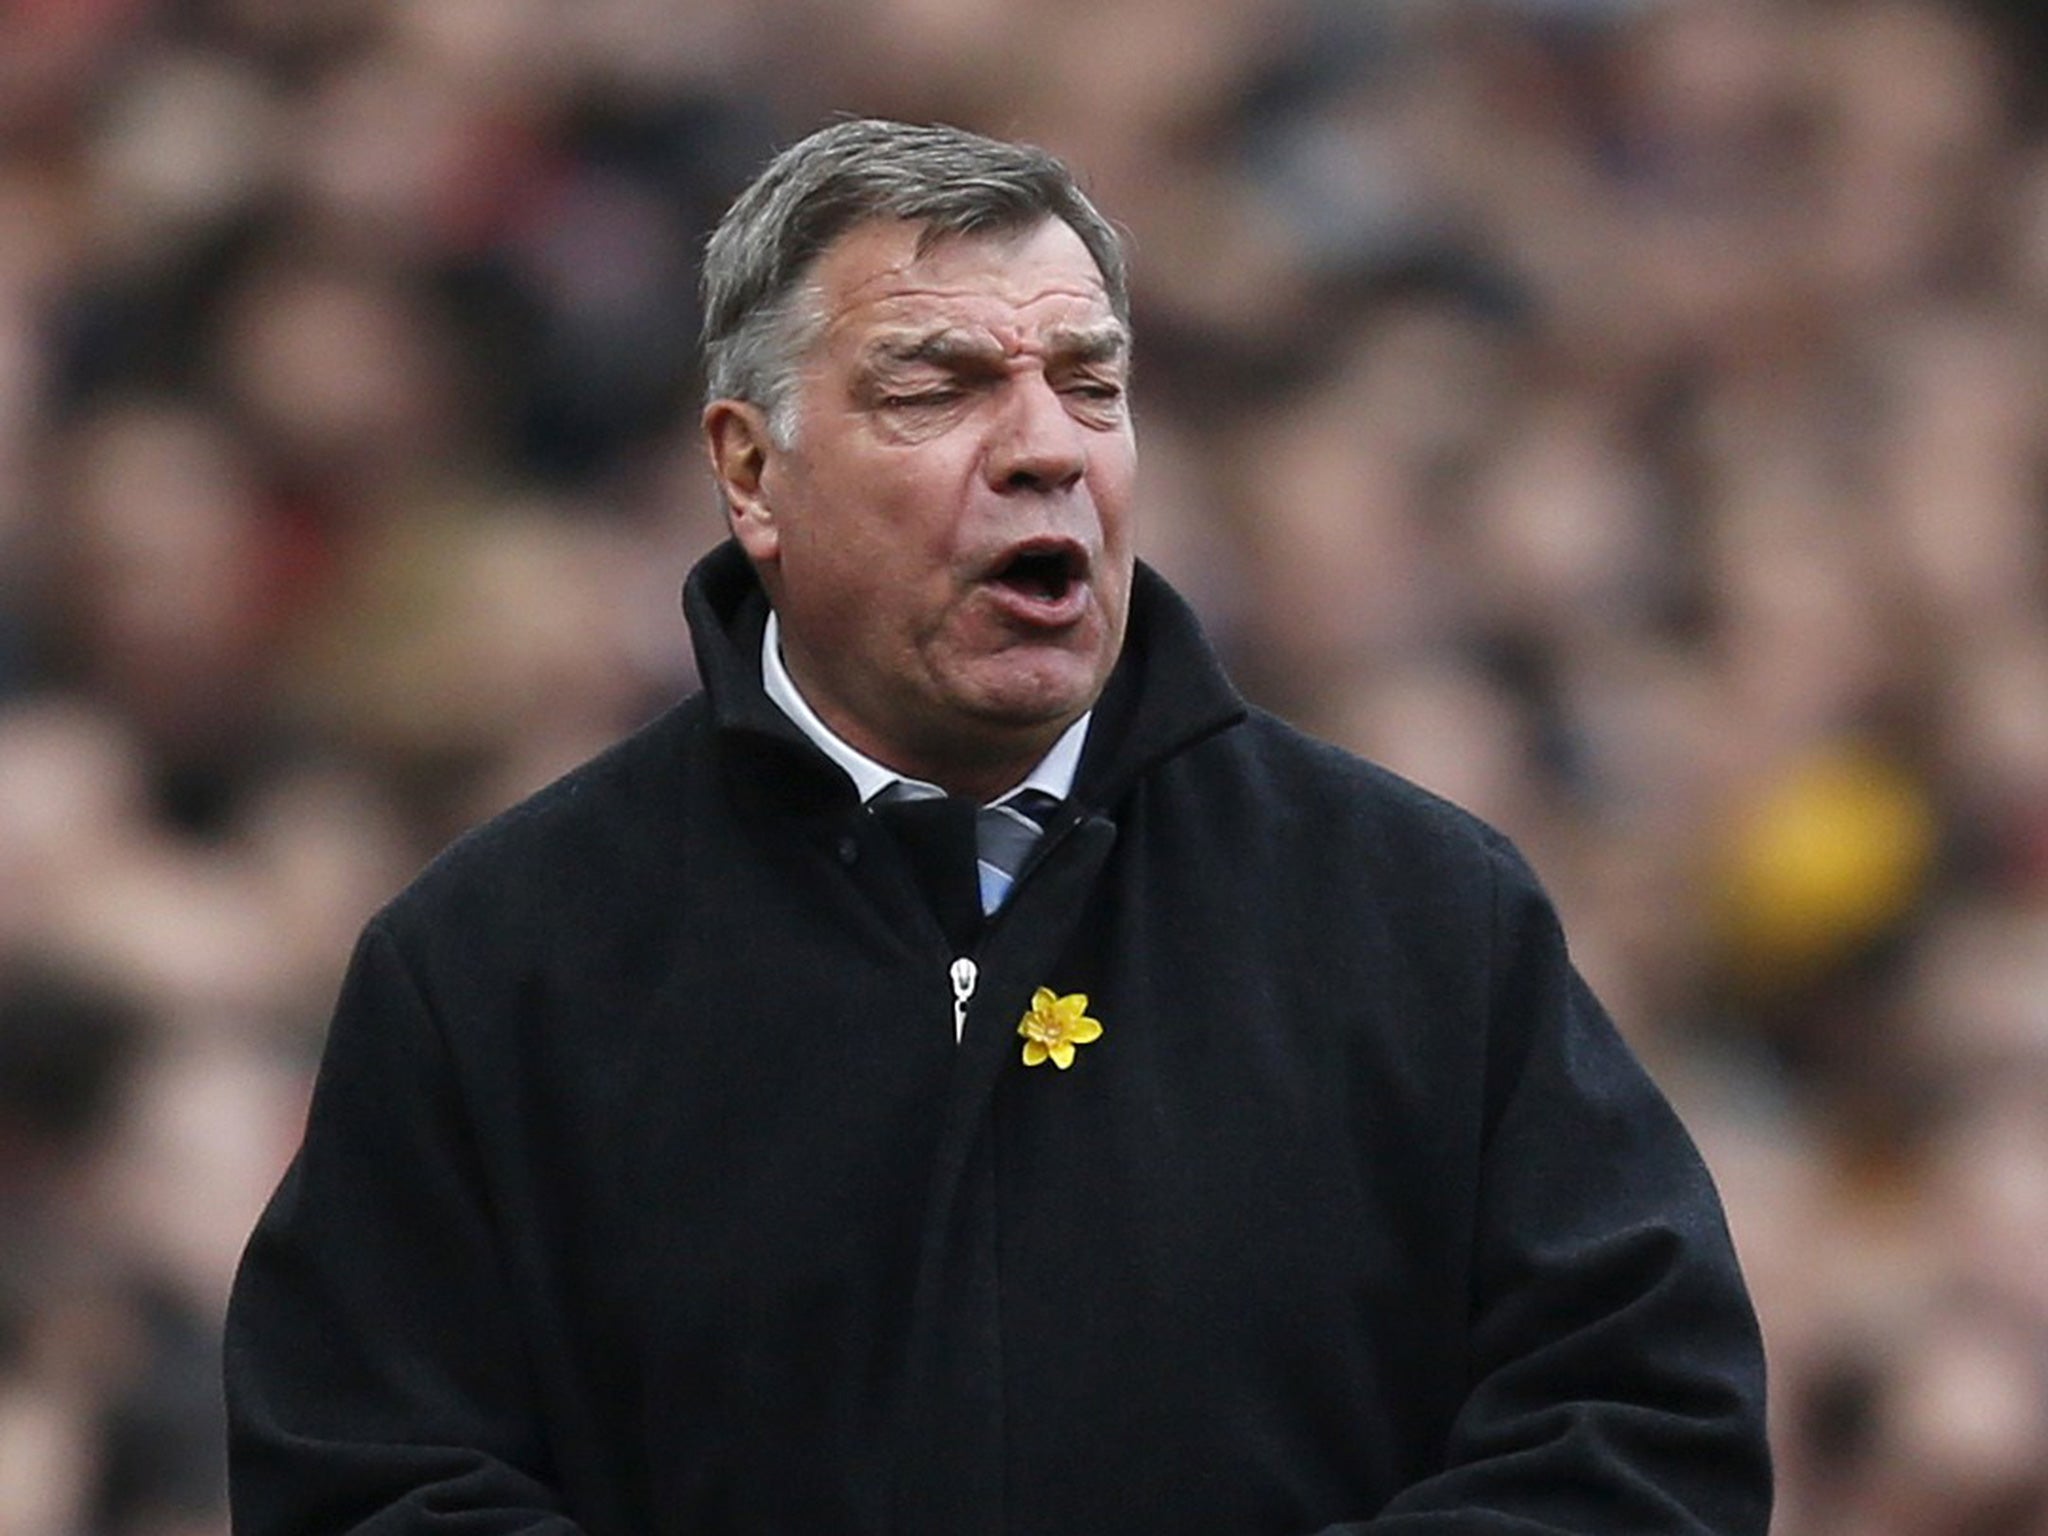 Sam Allardyce says West Ham have been ‘under-results-getting’ not under-performing